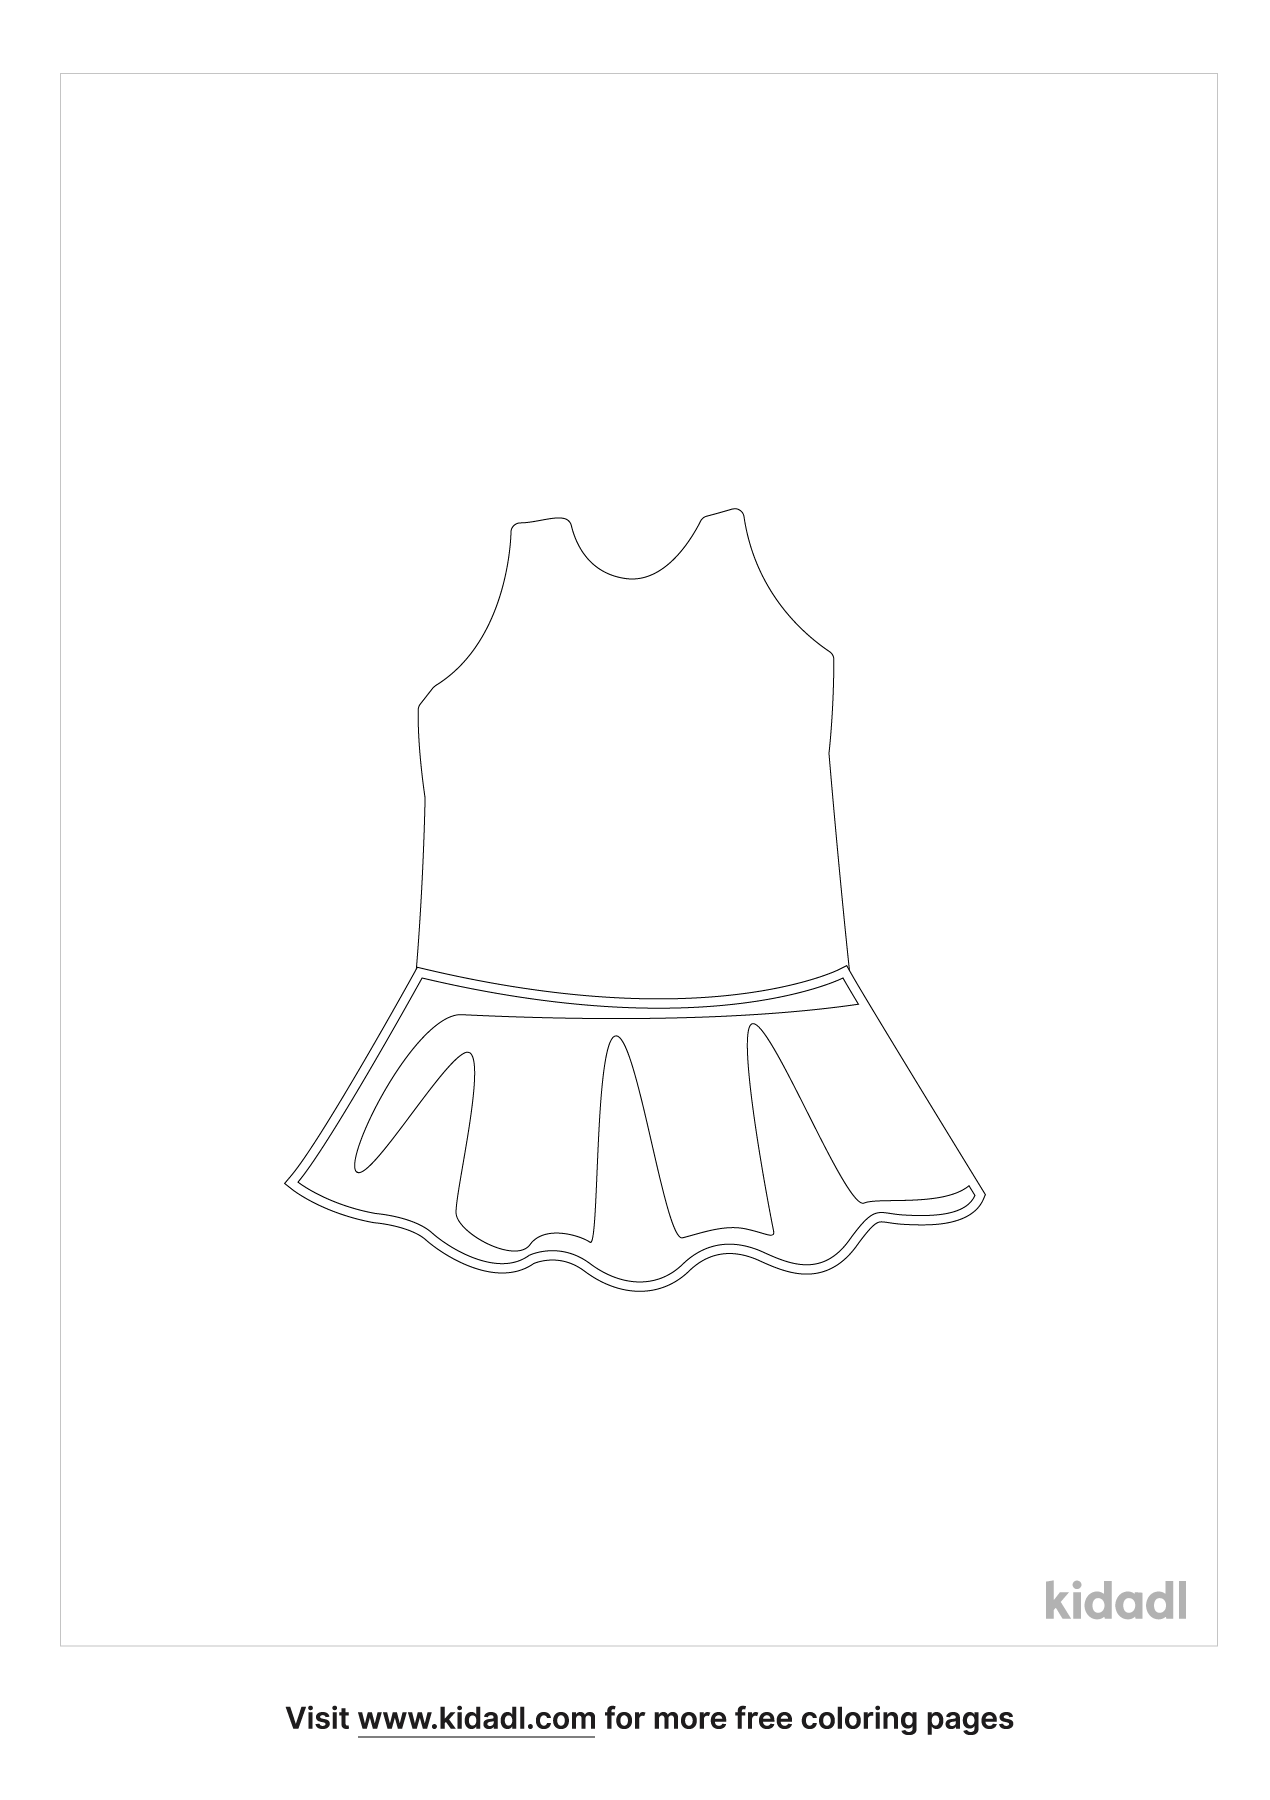 Swimsuit Coloring Pages | Free Fashion-and-beauty Coloring Pages | Kidadl